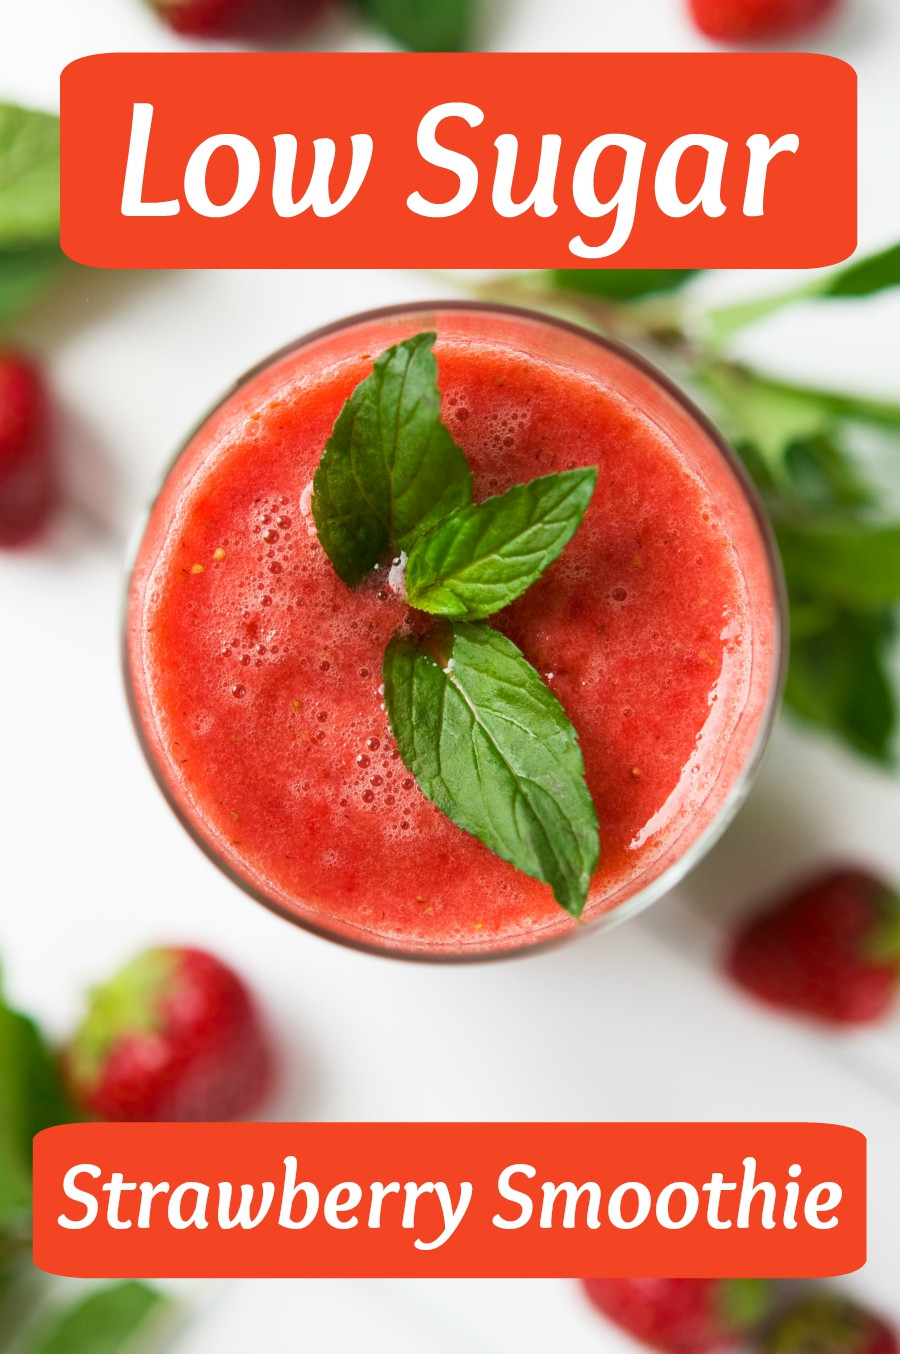 Low Sugar Smoothies For Diabetics
 Low Sugar Strawberry Smoothie All Nutribullet Recipes